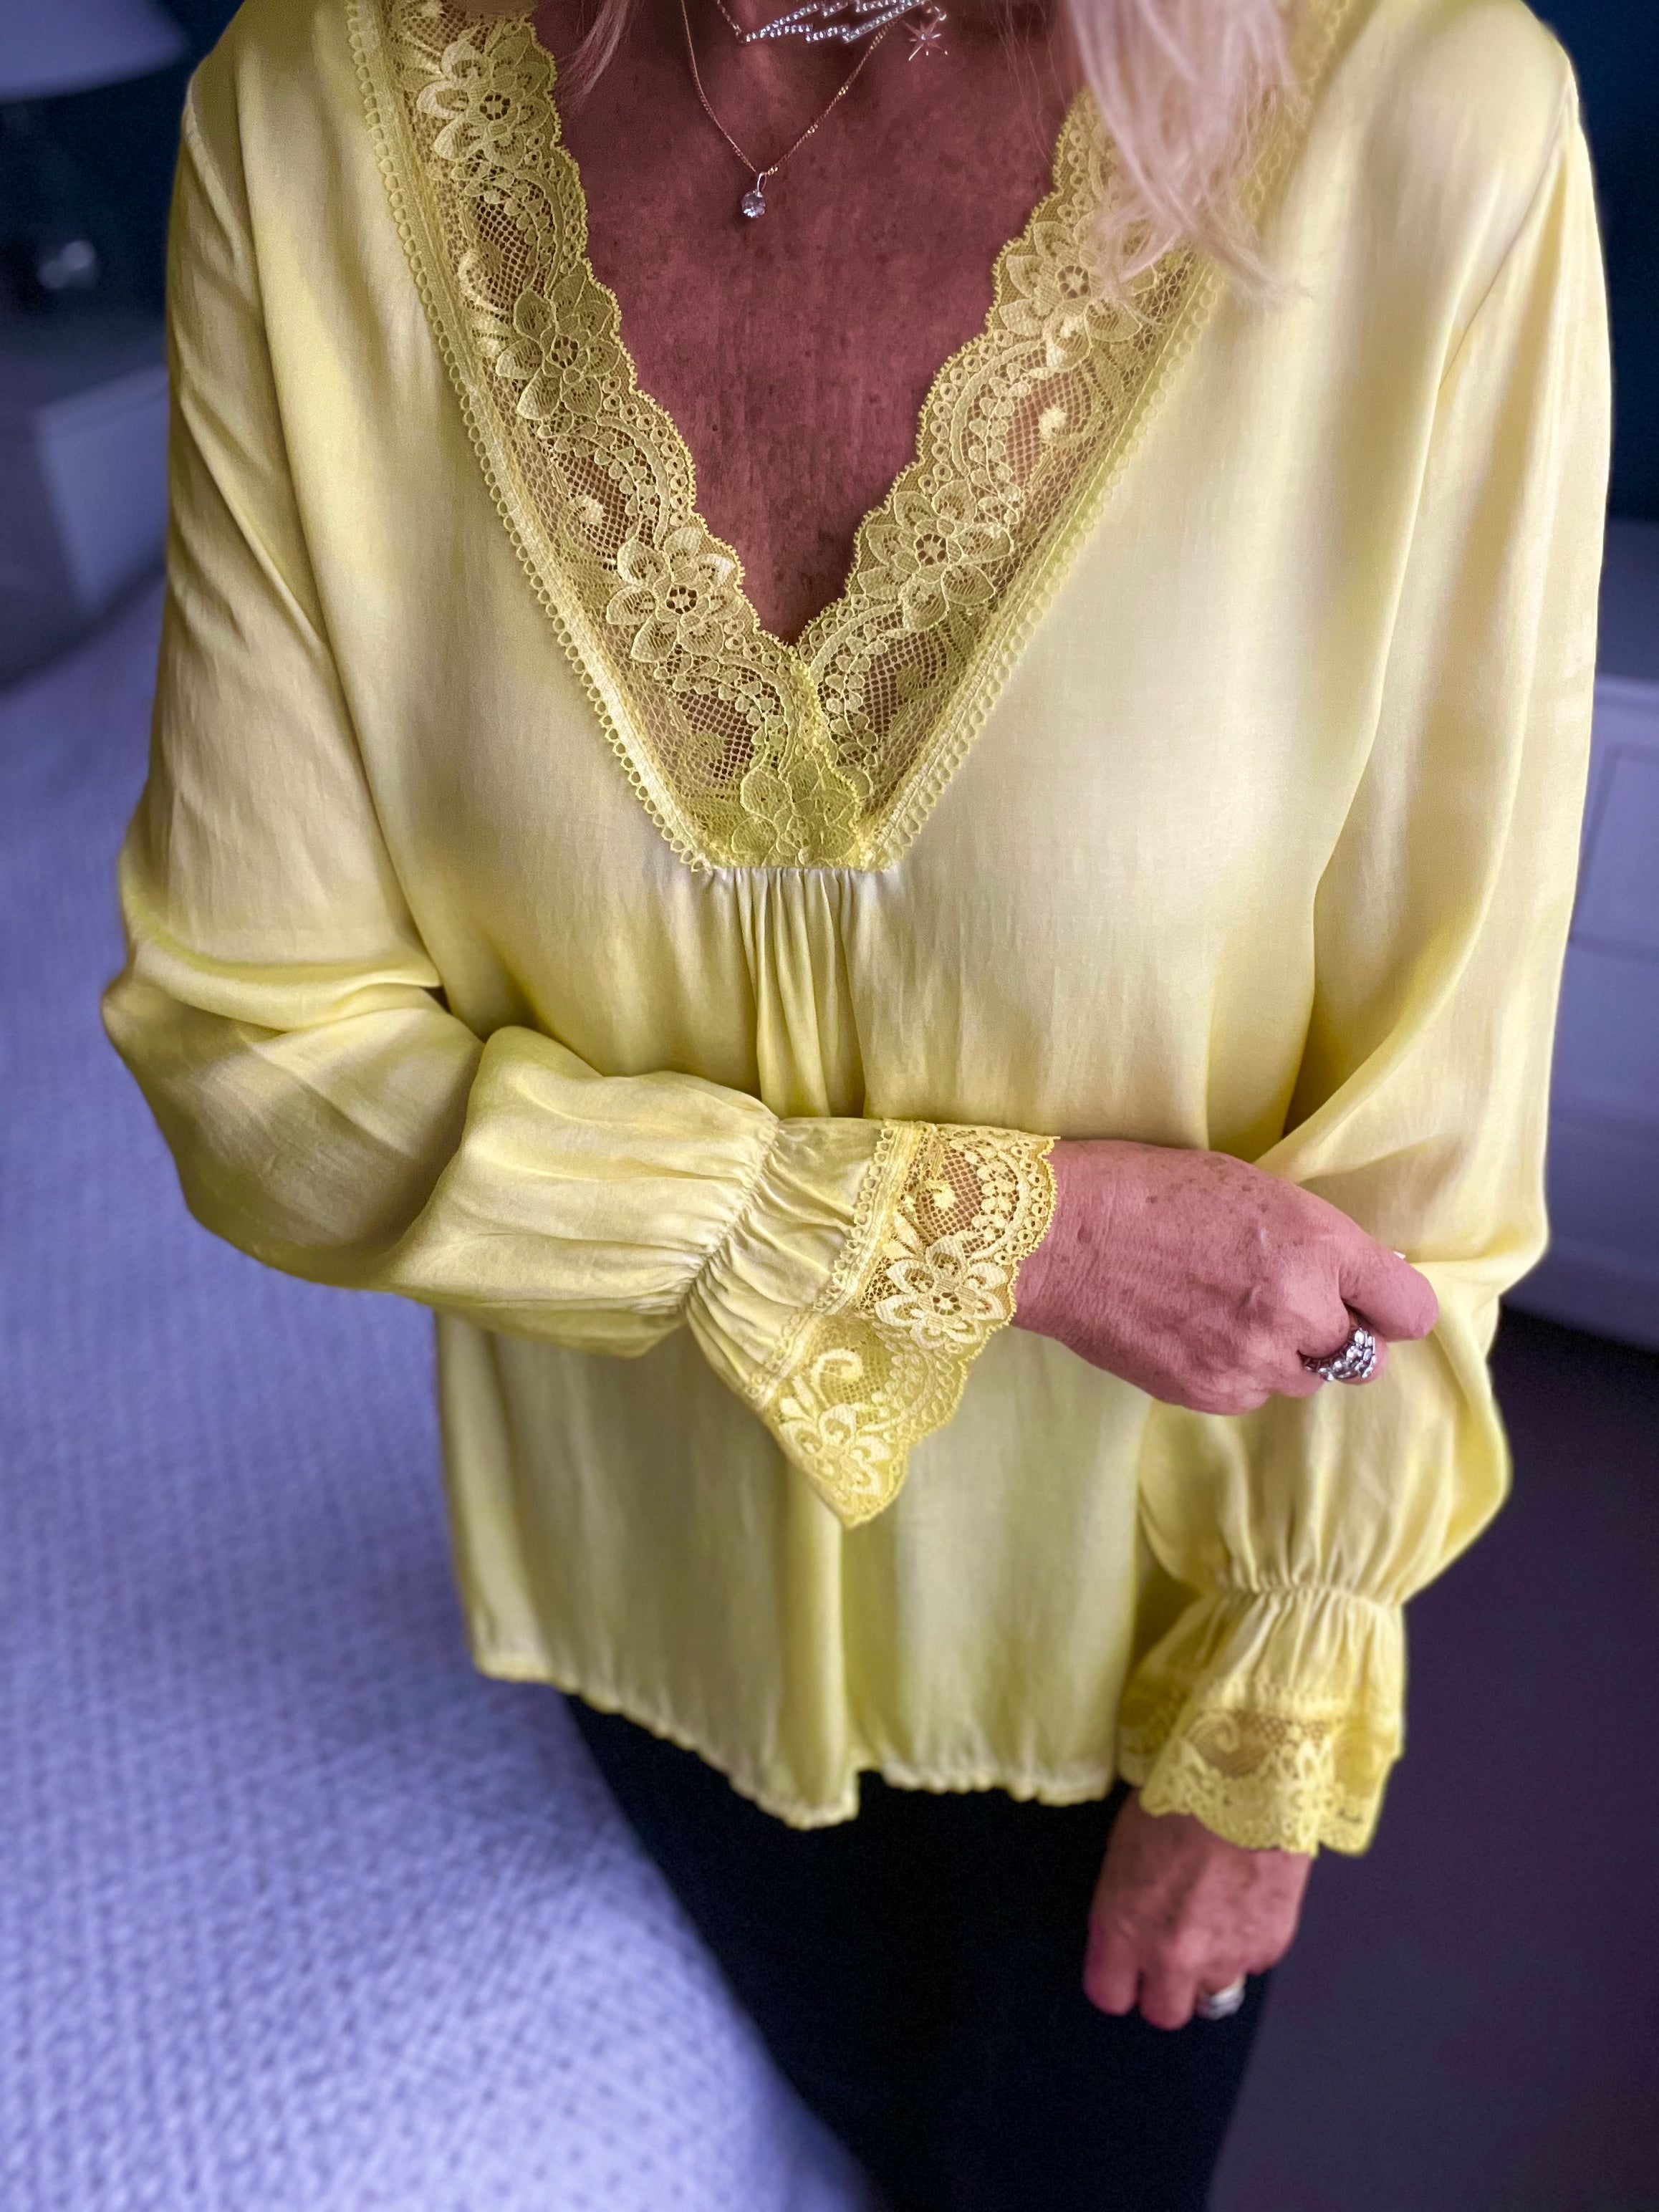 Silky Top with Lace Trim in Yellow